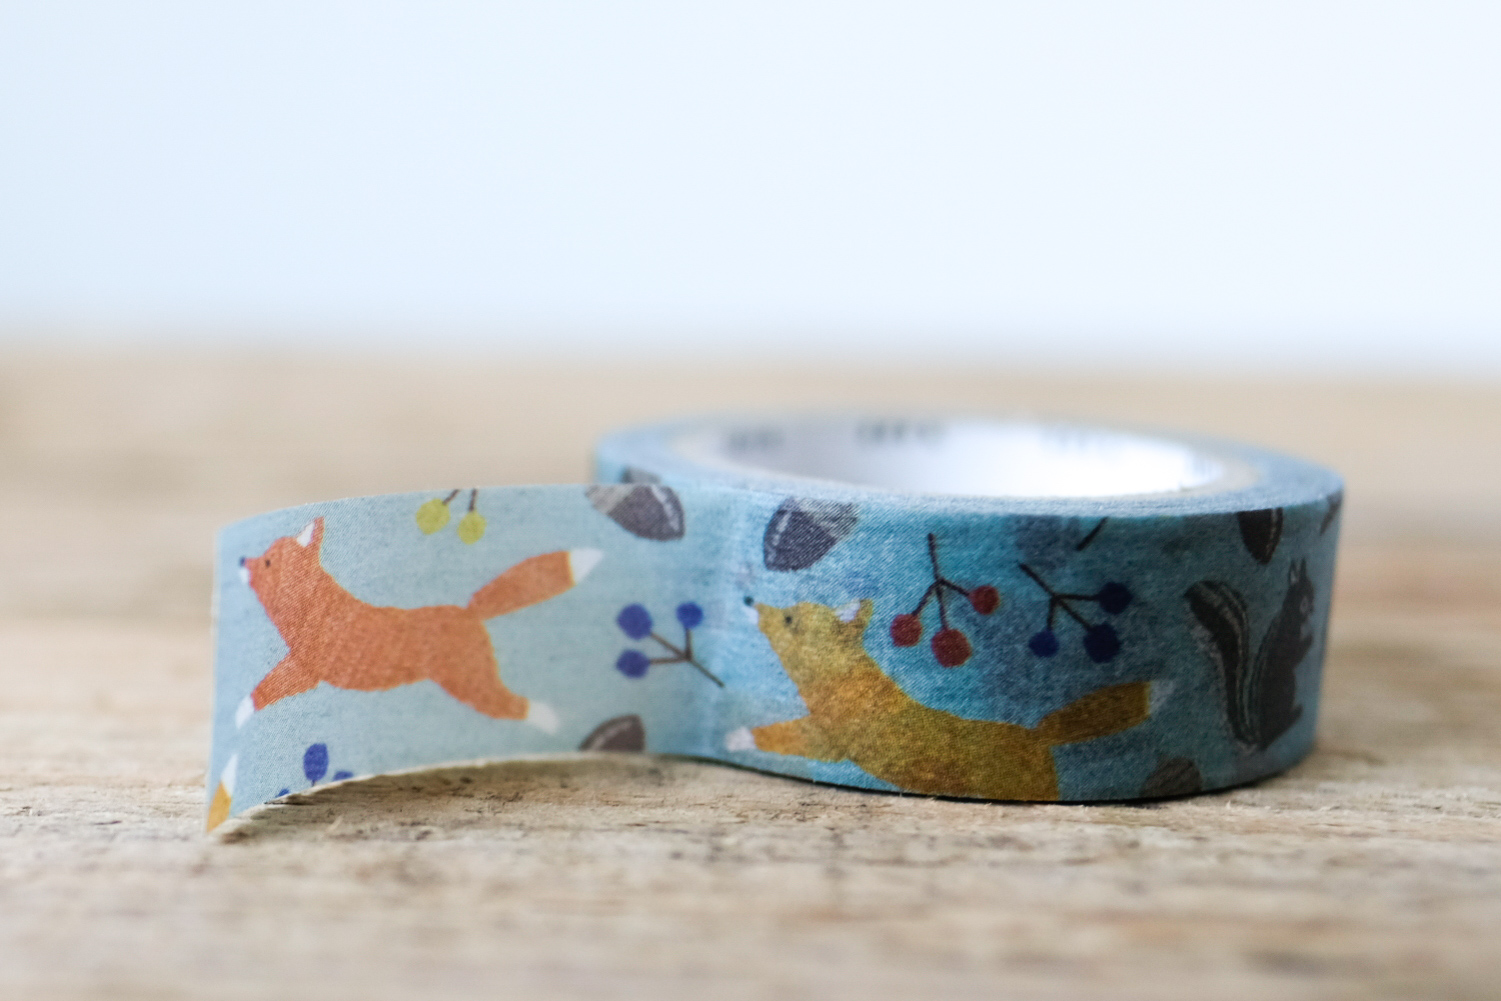 mt masking tape ex embroidery fox and squirrel